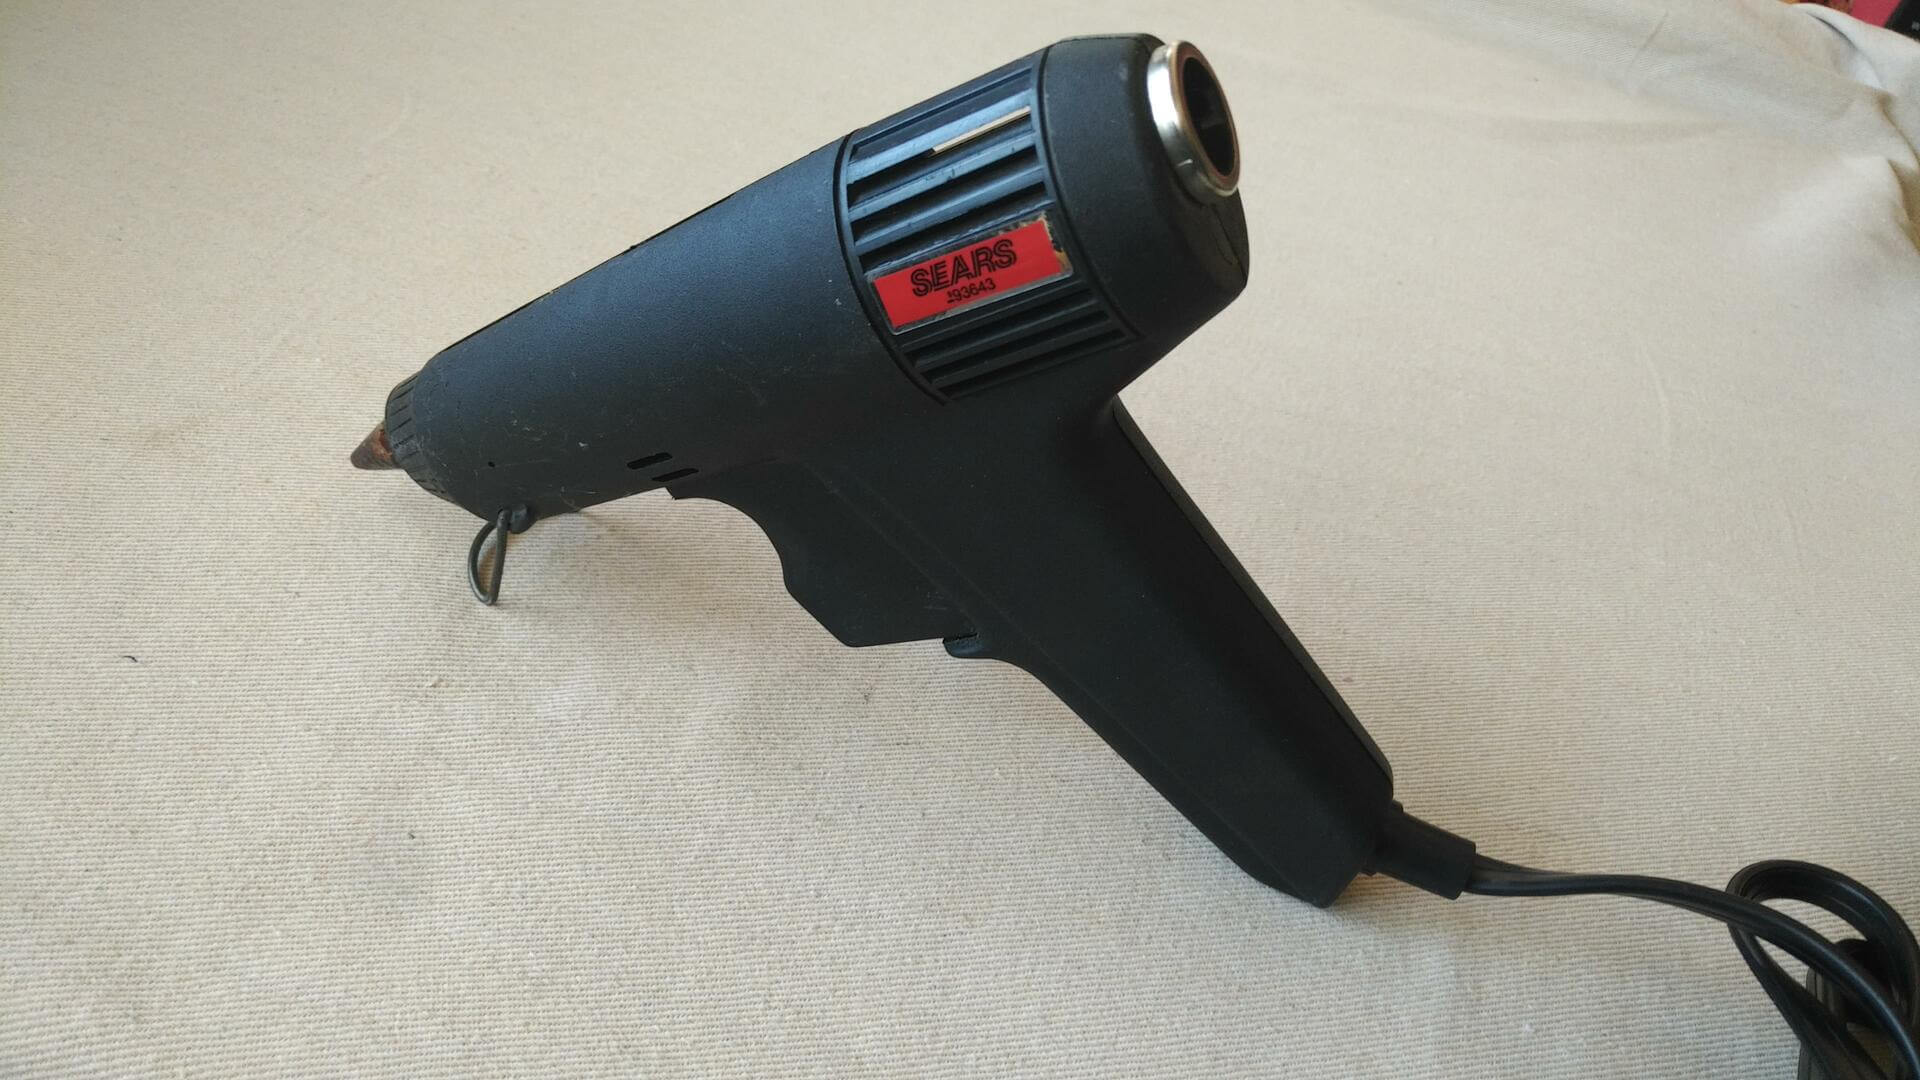 Sears Craftsman electric hot glue gun model no 193643. Vintage made in USA collectible multi purpose crafts and upholstery adhesive and hot melt glue gun